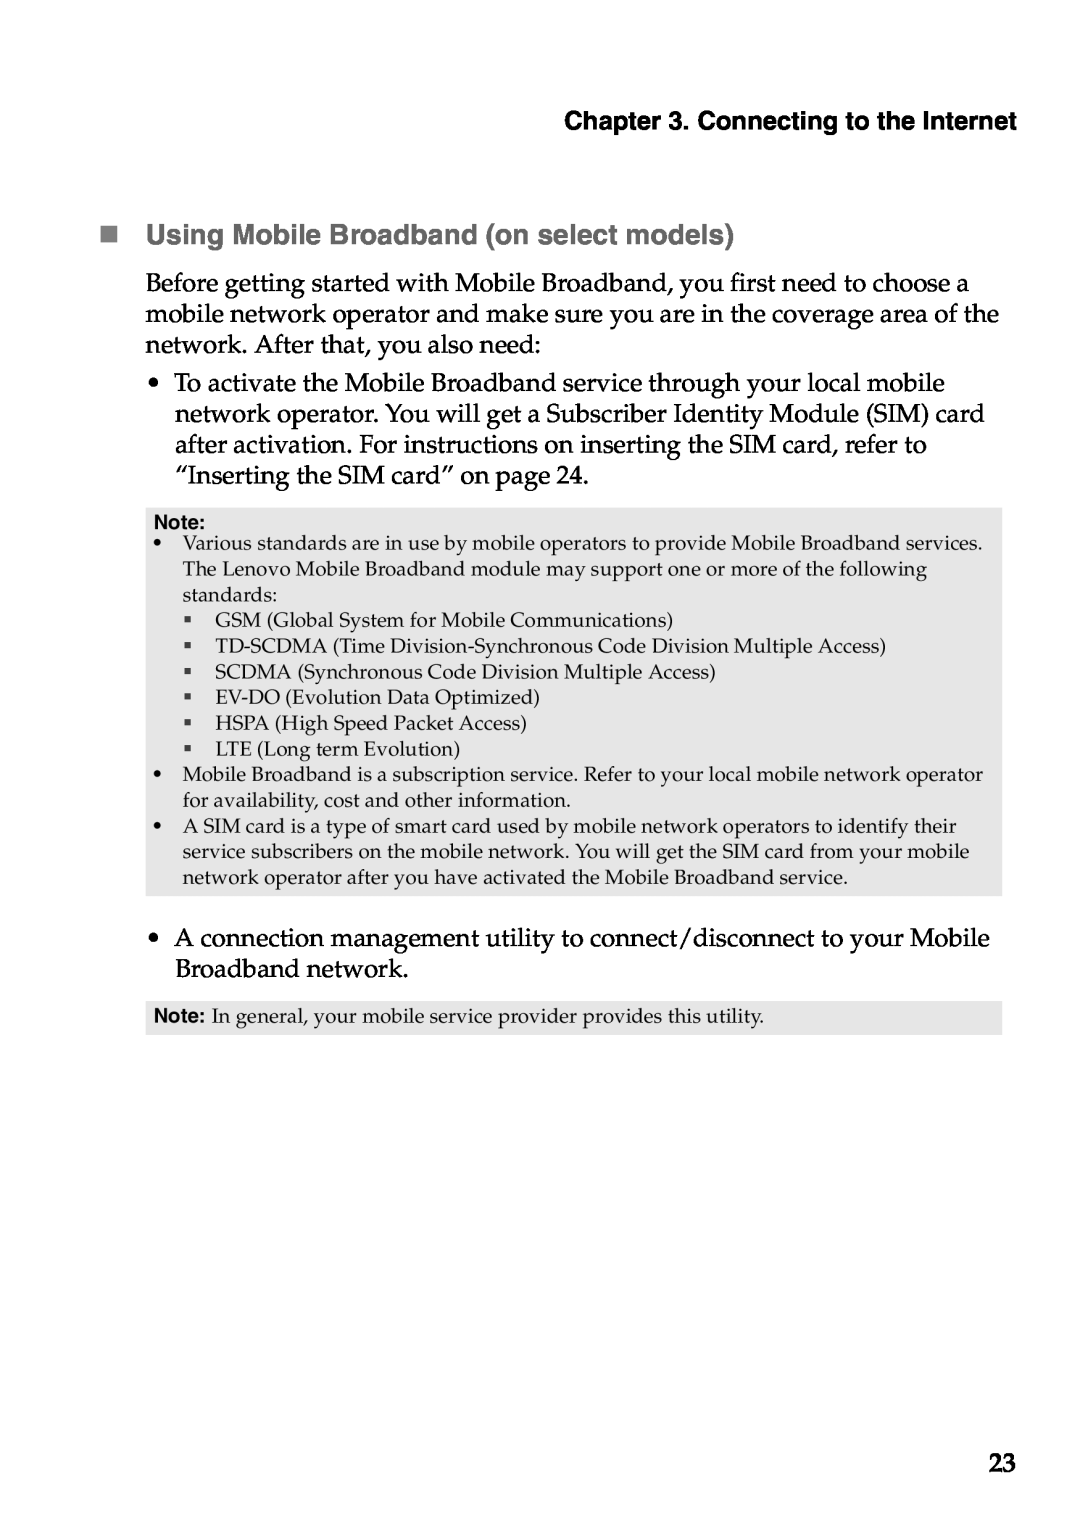 Lenovo S200, S206 manual „ Using Mobile Broadband on select models, Connecting to the Internet 